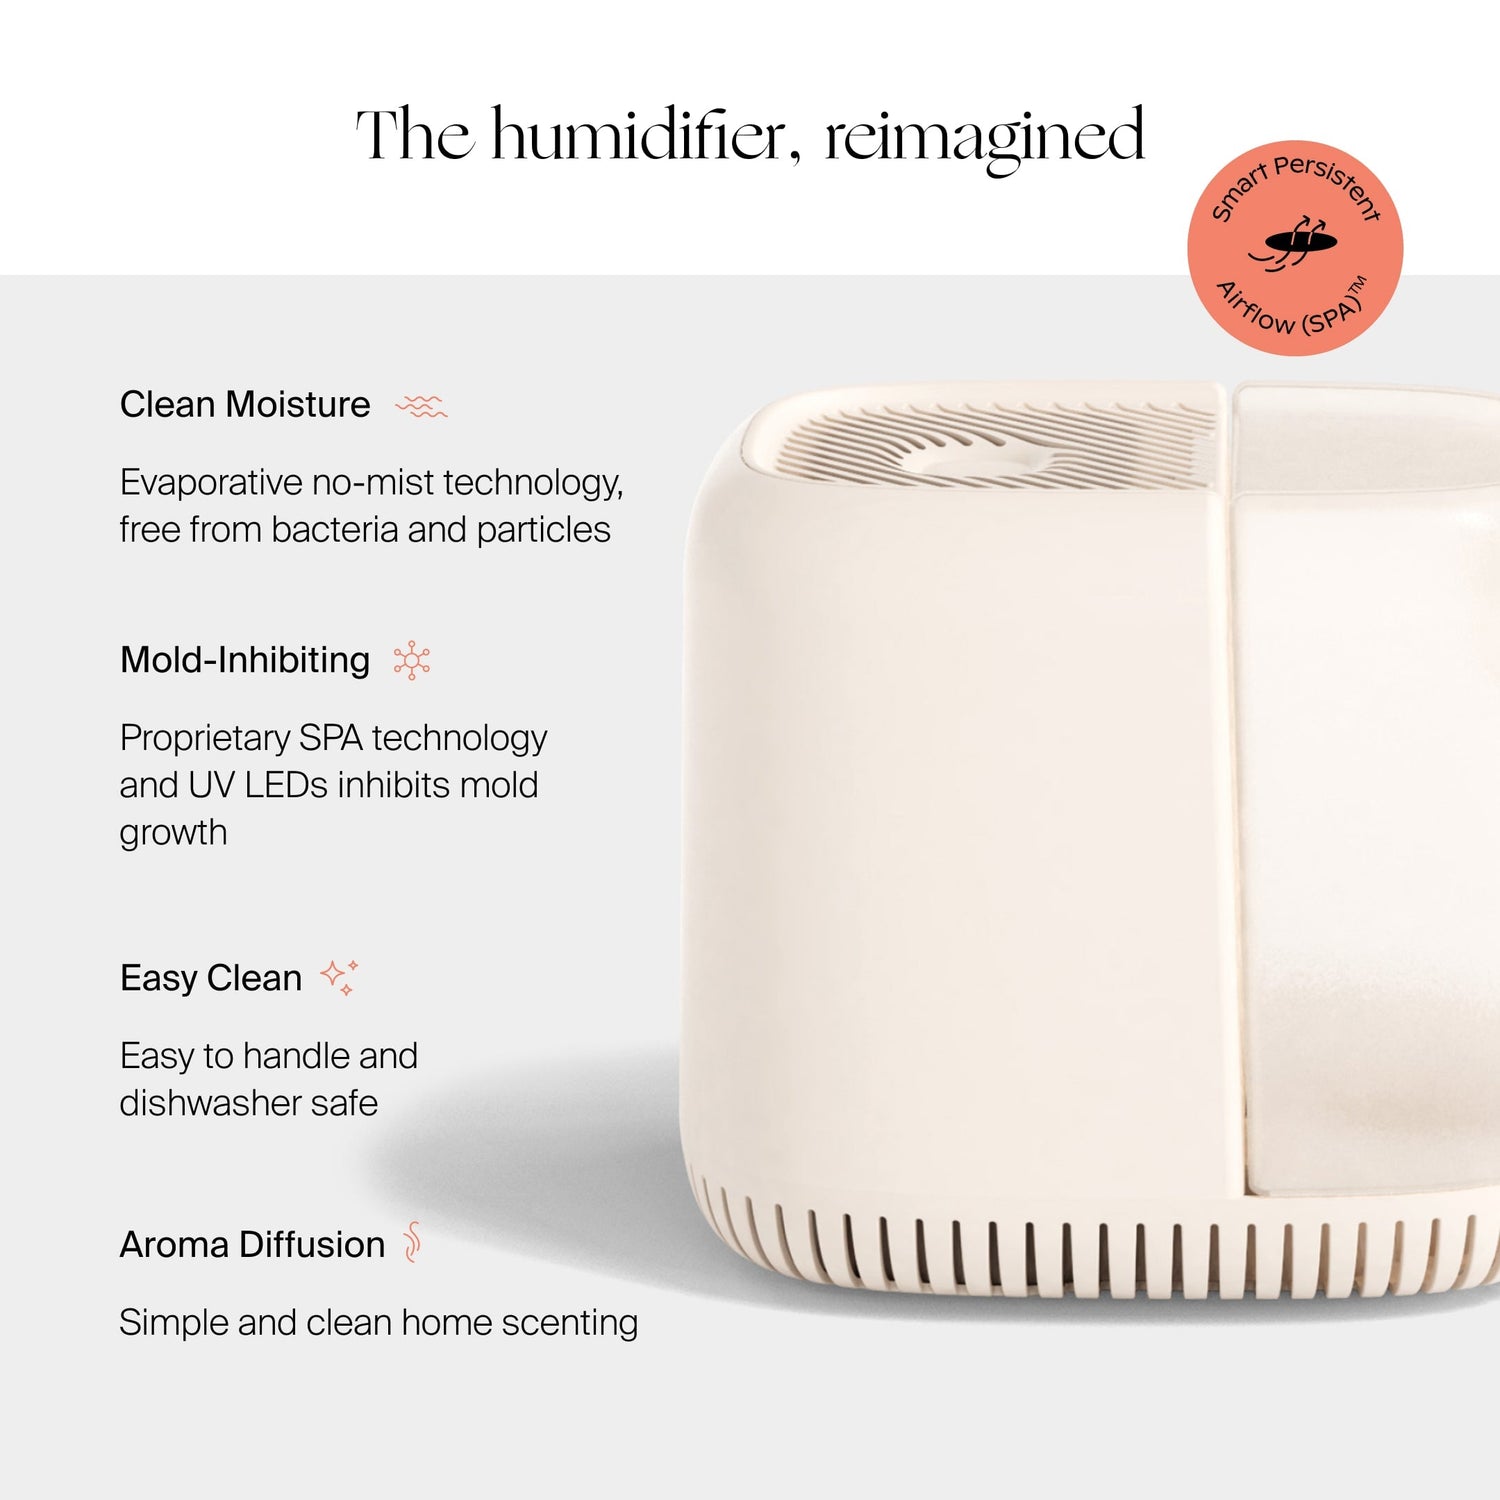 Bedside Humidifier Duo | Lifestyle, the humidifier, reimagined